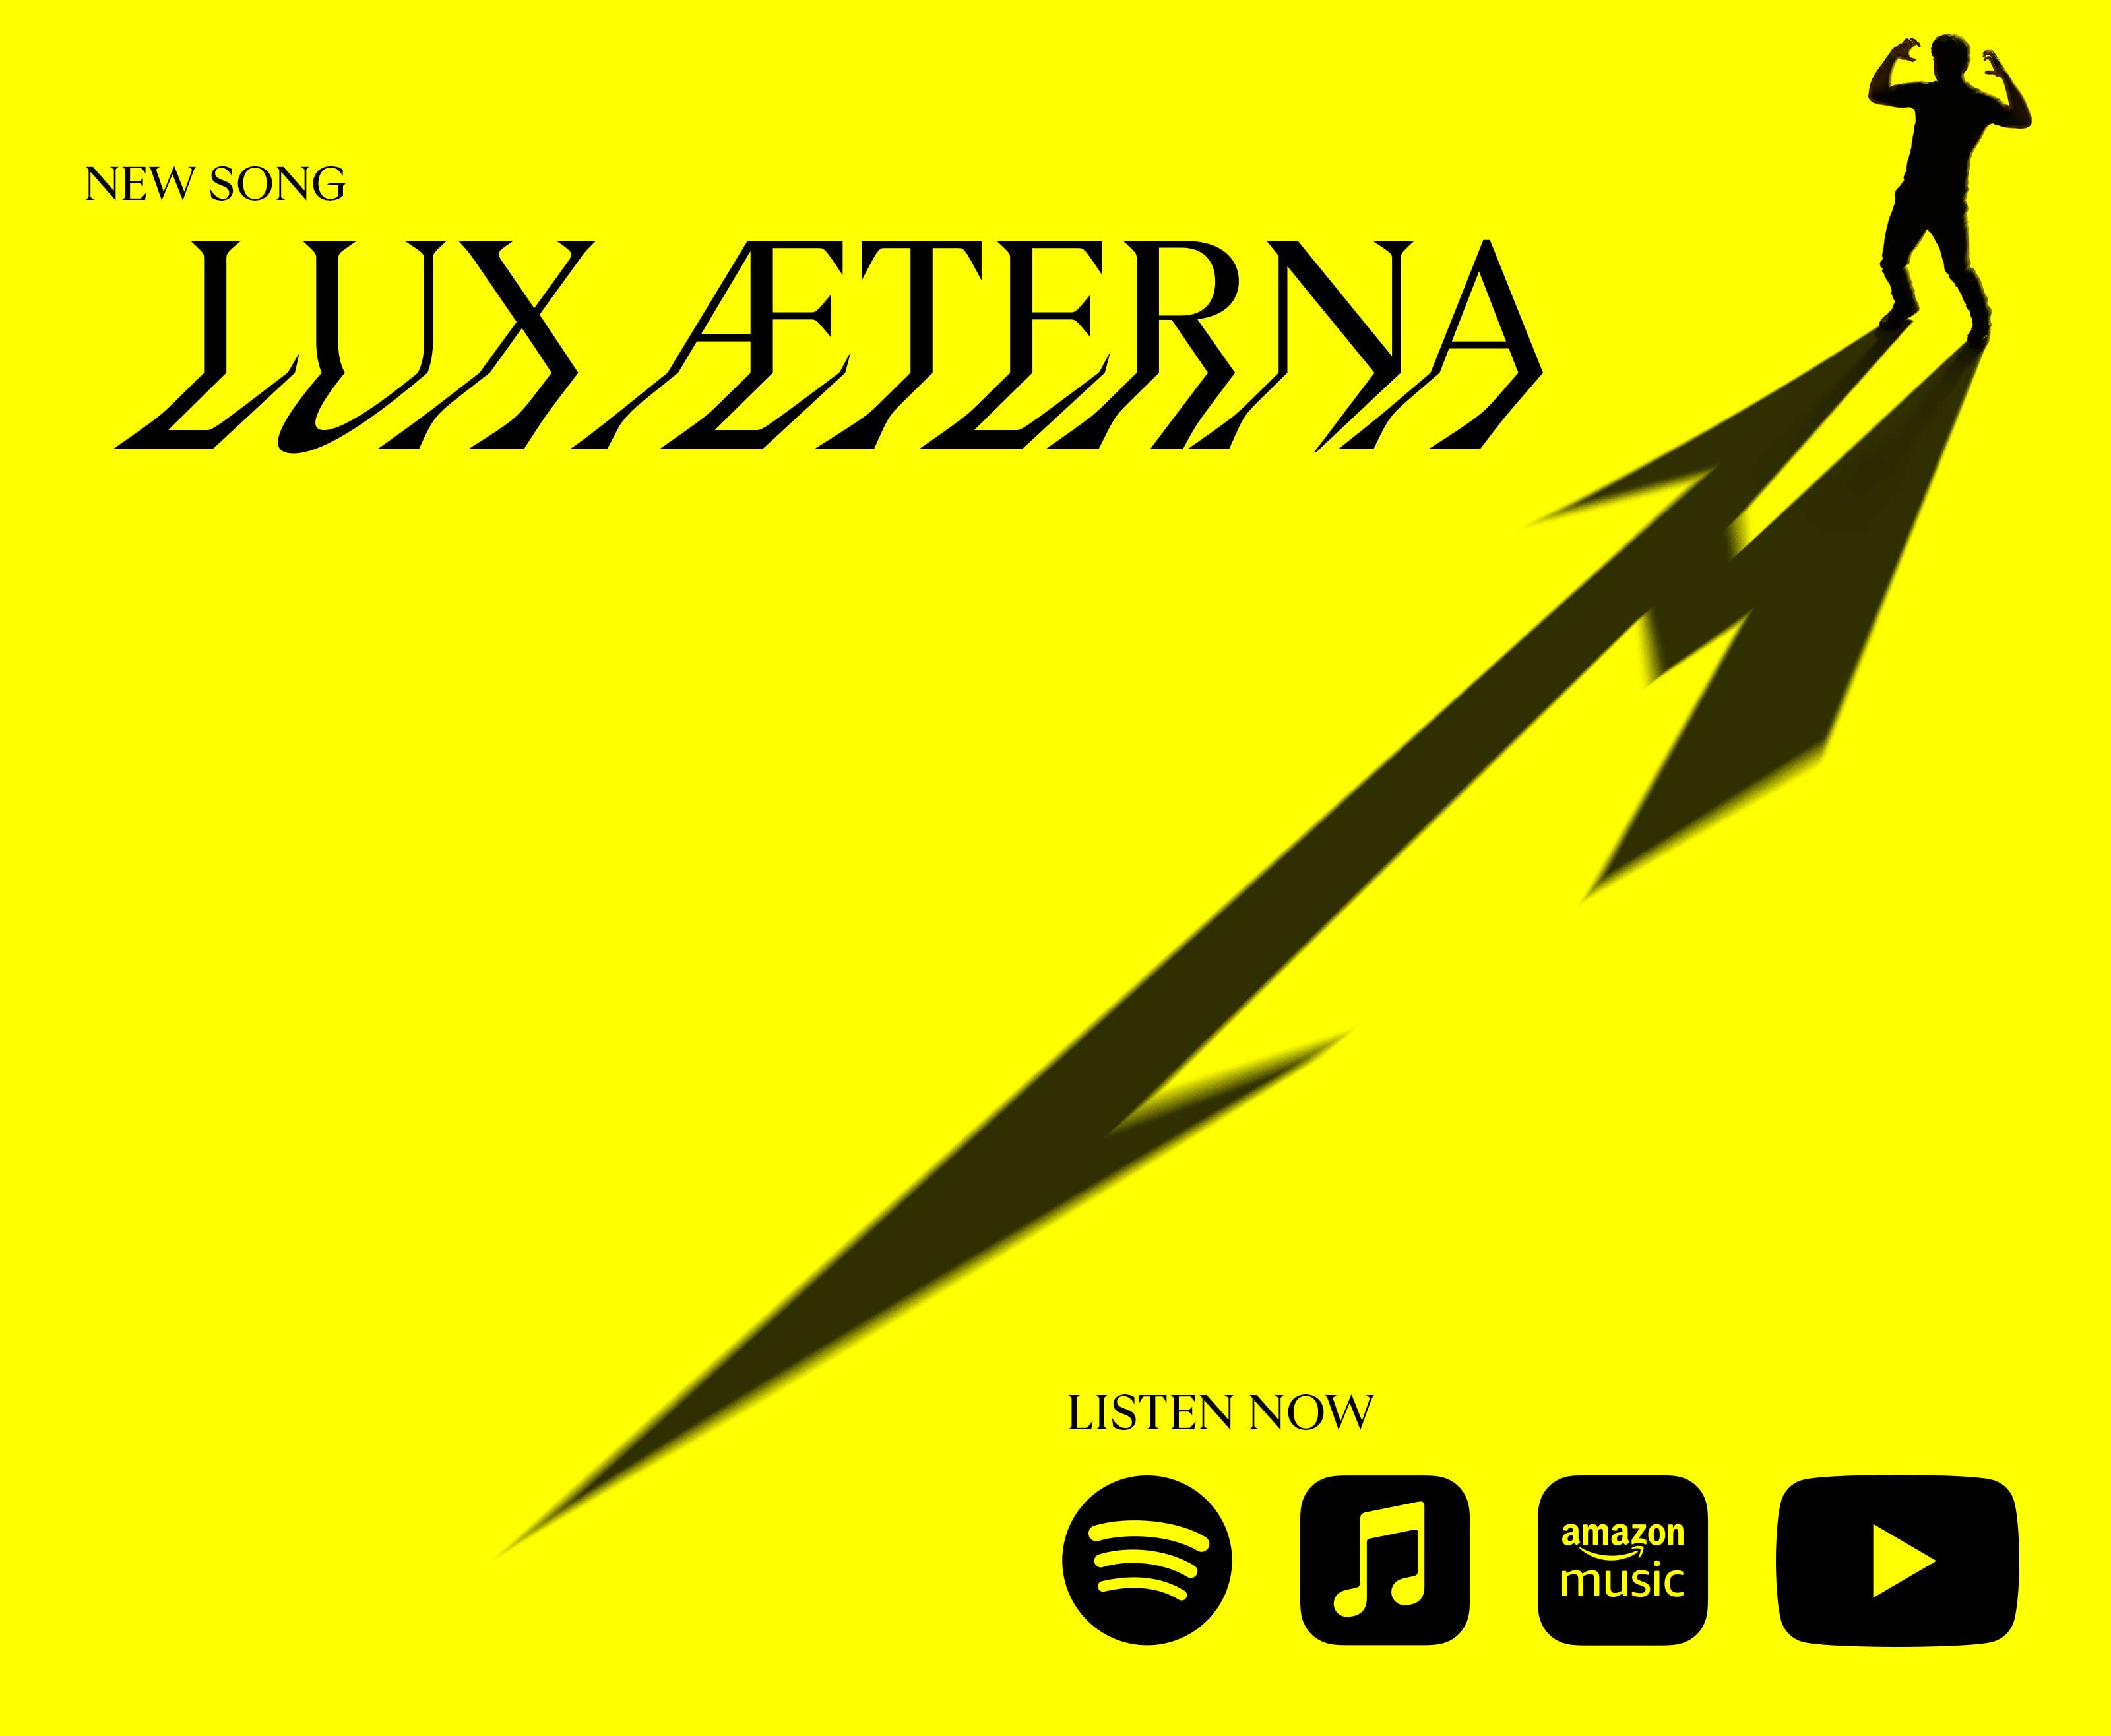 Album art of "New Song, Lux Aeterna". Black outline of a distressed, screaming person over a yellow background. Their shadow is the Metallica M logo.